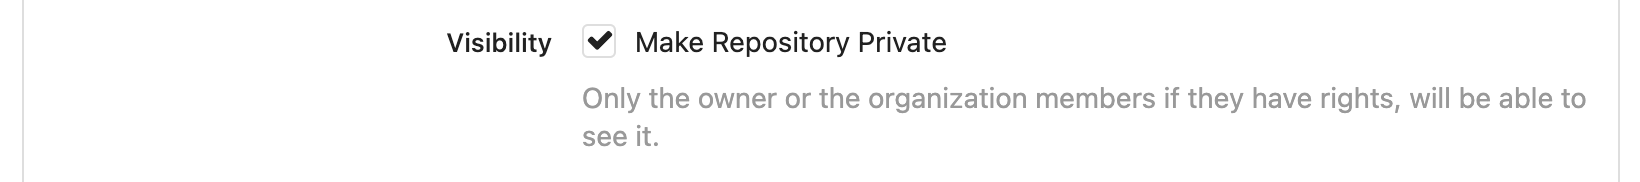 Visibility setting, checkbox to make repository private or not.